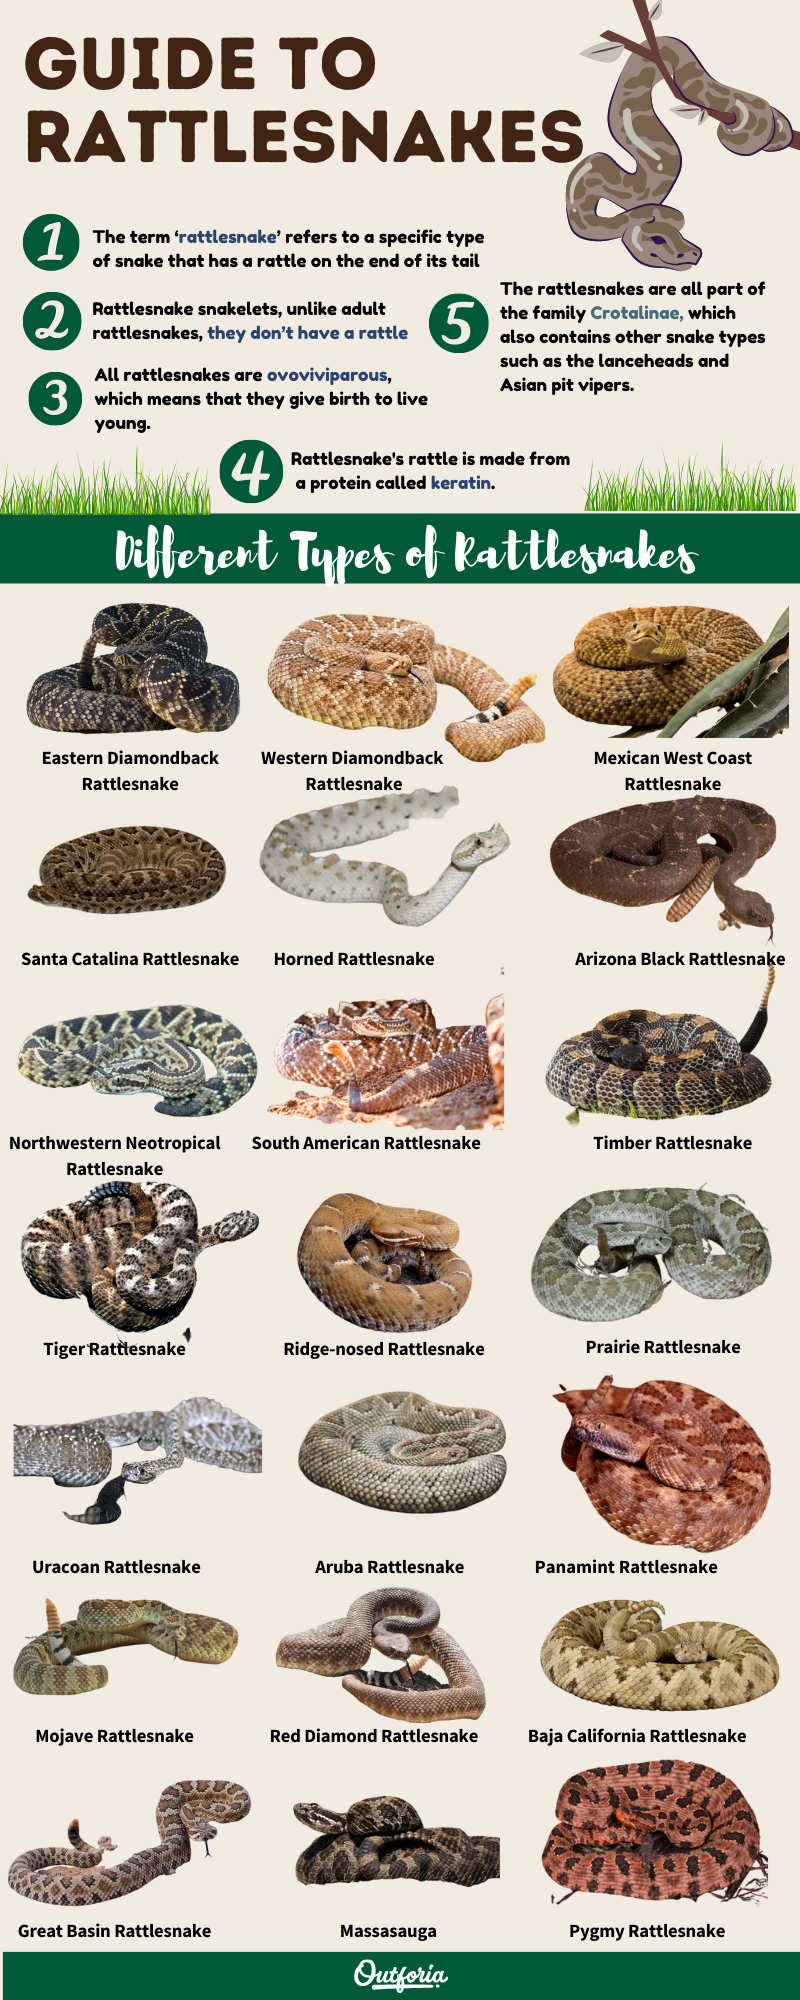 Types of rattlesnakes infographic